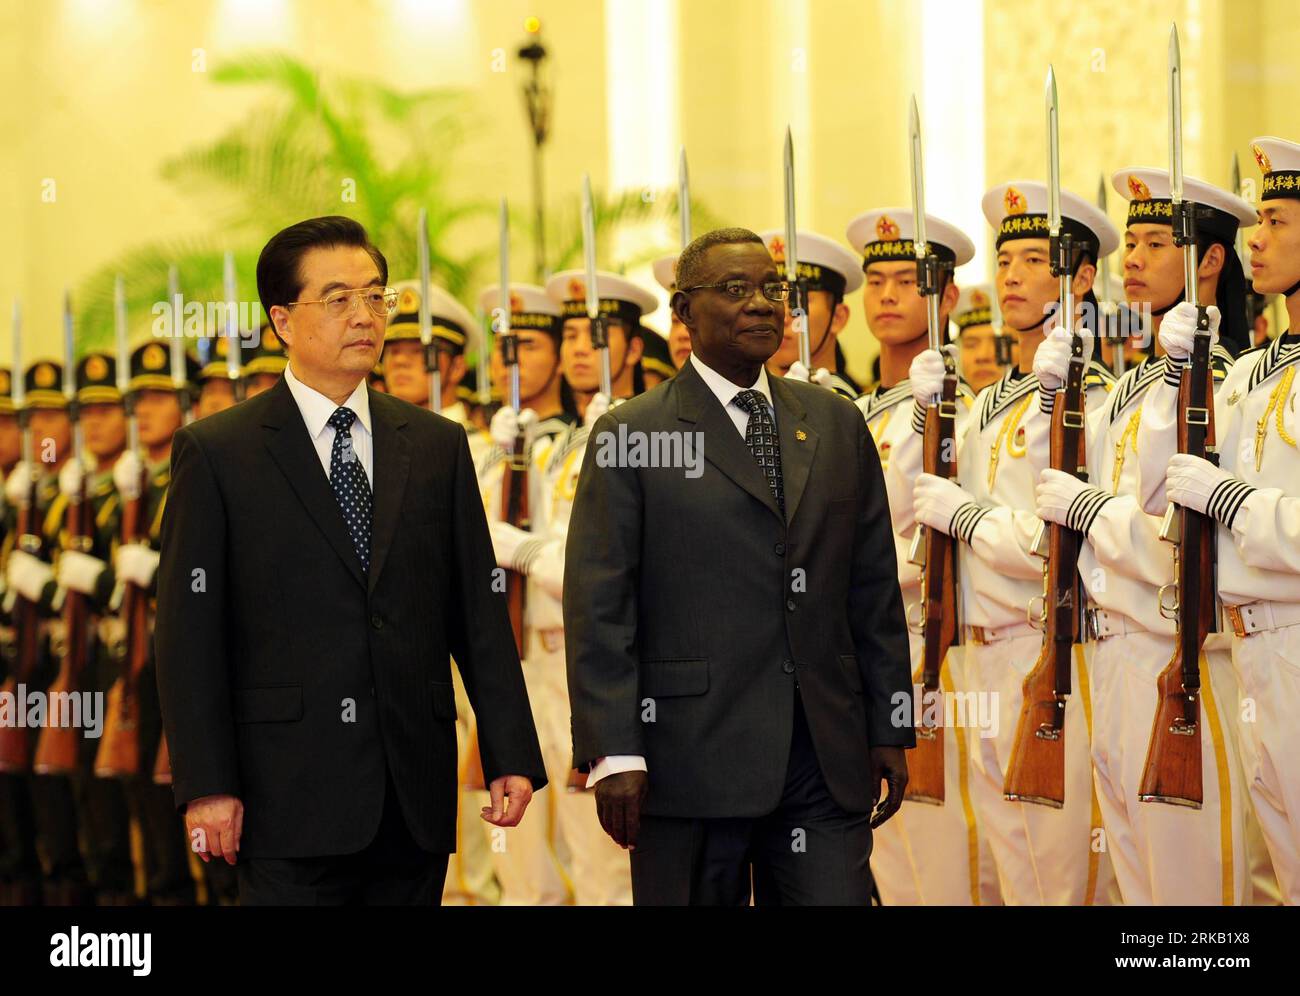 Bildnummer: 54445140  Datum: 20.09.2010  Copyright: imago/Xinhua (100920) -- BEIJING, Sept. 20, 2010 (Xinhua) -- Chinese President Hu Jintao (L) accompanies his Ghanaian counterpart John Evans Atta Mills (2nd L) to inspect the guard of honor during a welcoming ceremony he holds for Mills at the Great Hall of the in Beijing, capital of China, Sept. 20, 2010. (Xinhua/Zhang Duo) CHINA-GHANA-PRESIDENTS-WELCOMING CEREMONY (CN) PUBLICATIONxNOTxINxCHN People Politik kbdig xdp 2010 quer premiumd xint     Bildnummer 54445140 Date 20 09 2010 Copyright Imago XINHUA  Beijing Sept 20 2010 XINHUA Chinese Pr Stock Photo